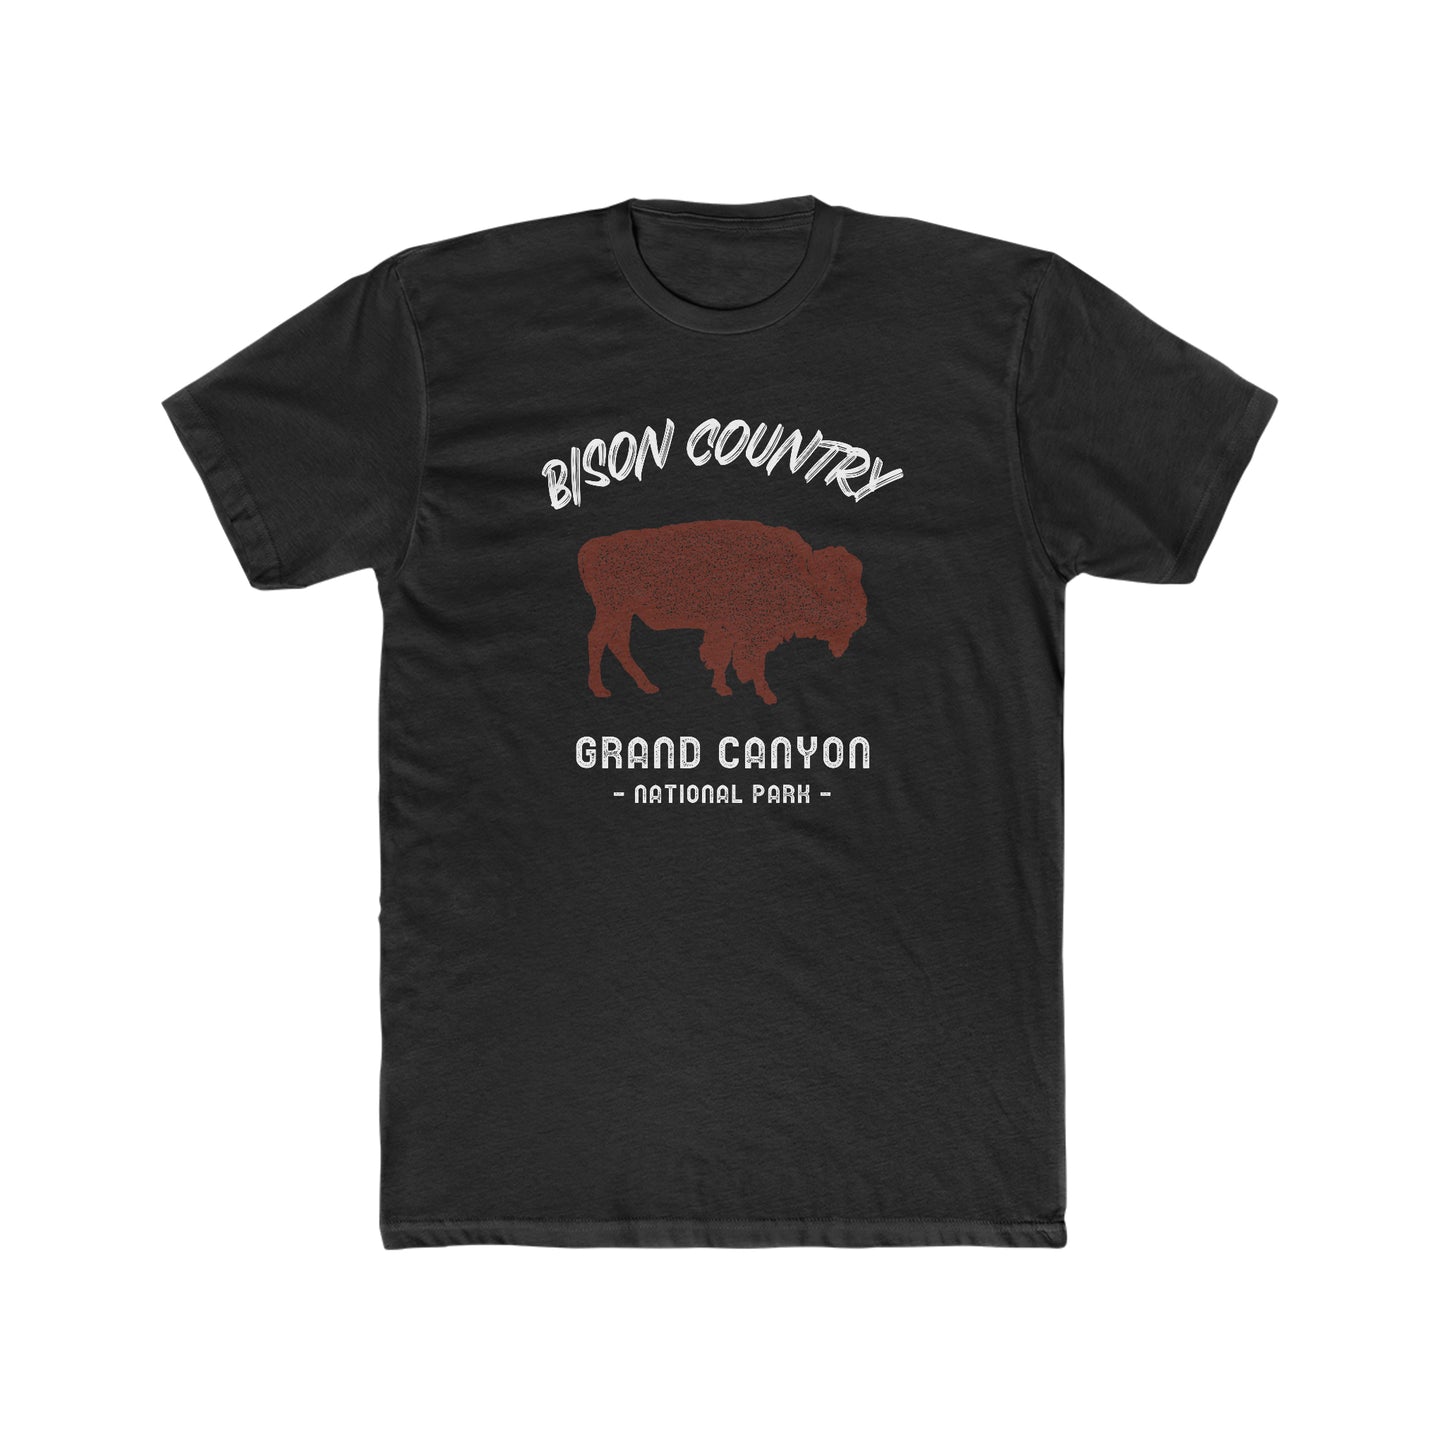 Grand Canyon National Park T-Shirt - Bison Country